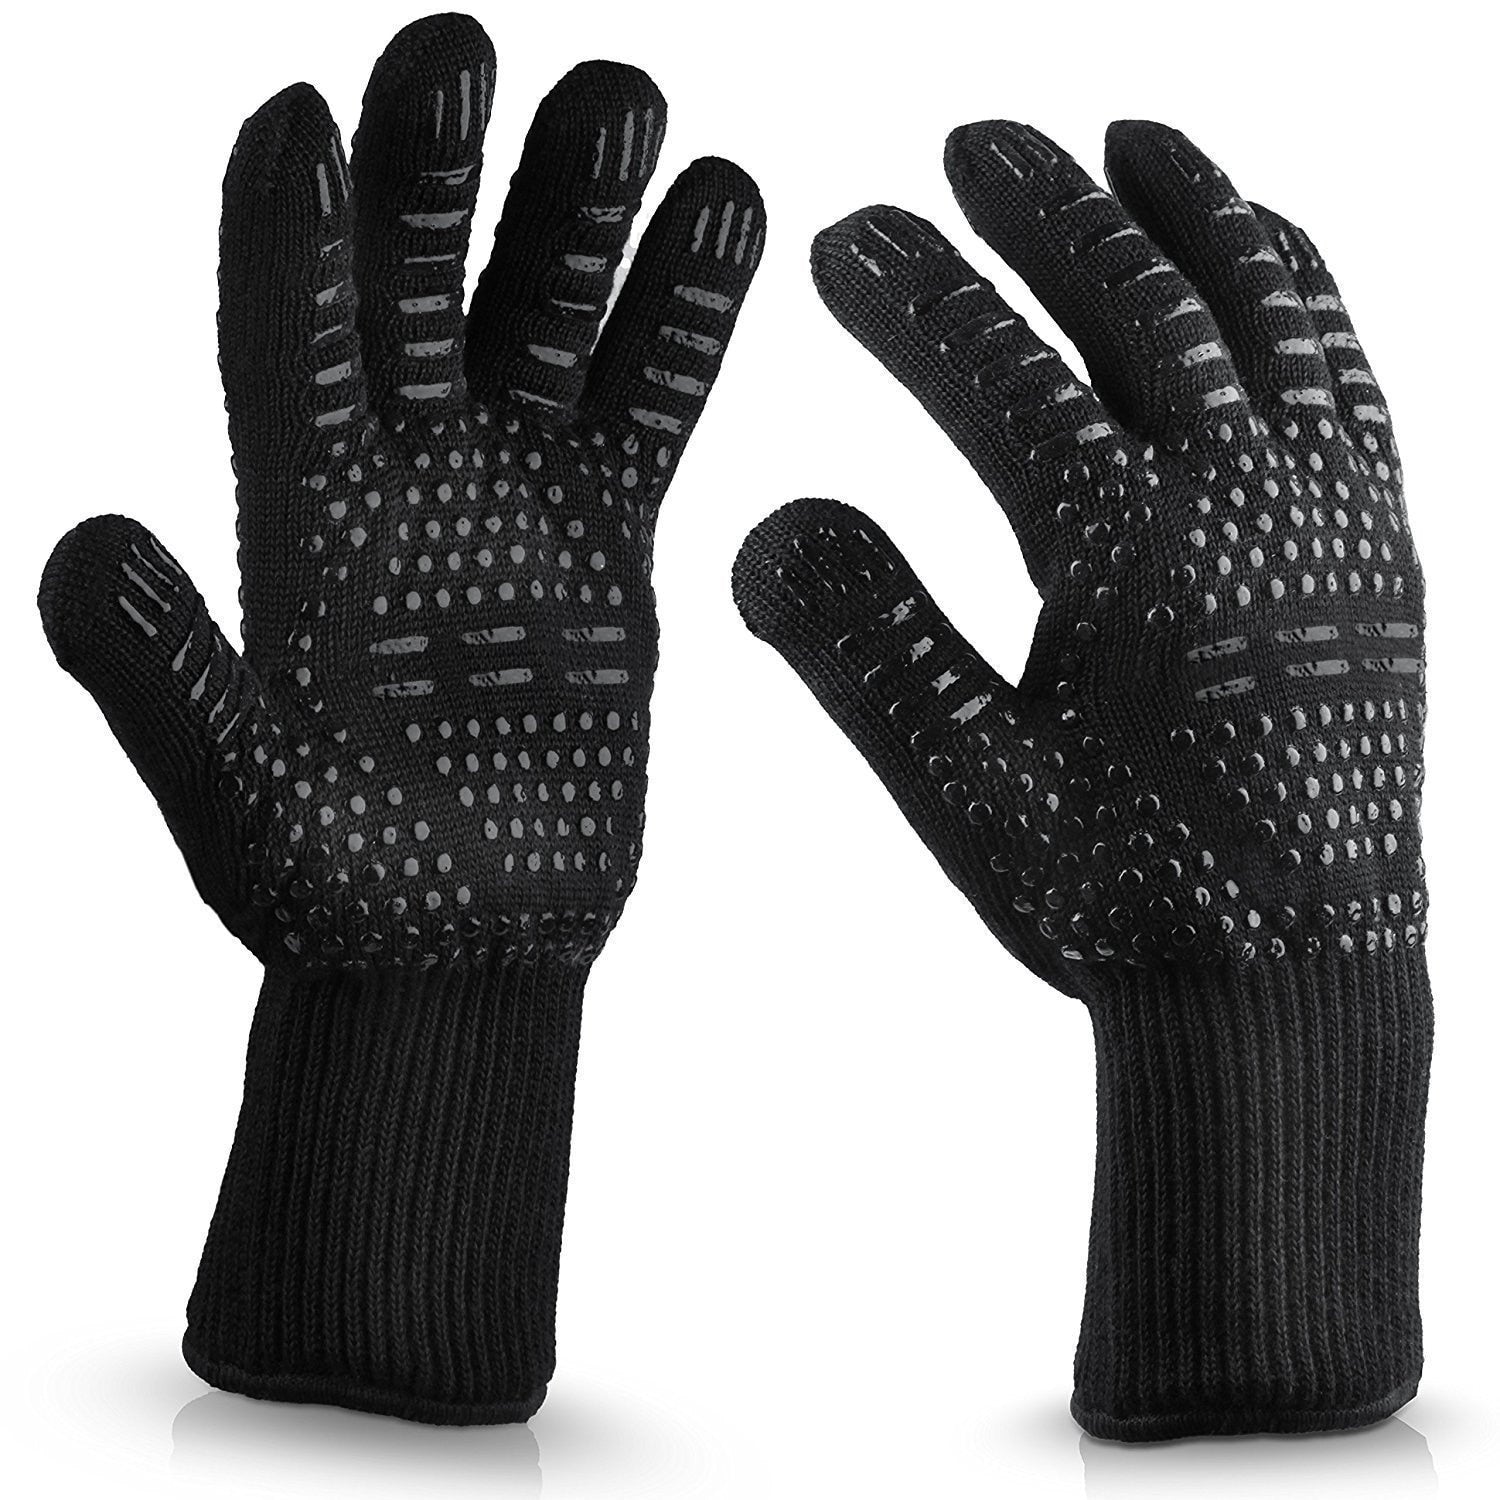 bakewere Oven Mitts Gloves BBQ Silicon gloves High Temperature Anti-scalding 500/800 Degree Insulation Barbecue Microwave - JustgreenBox